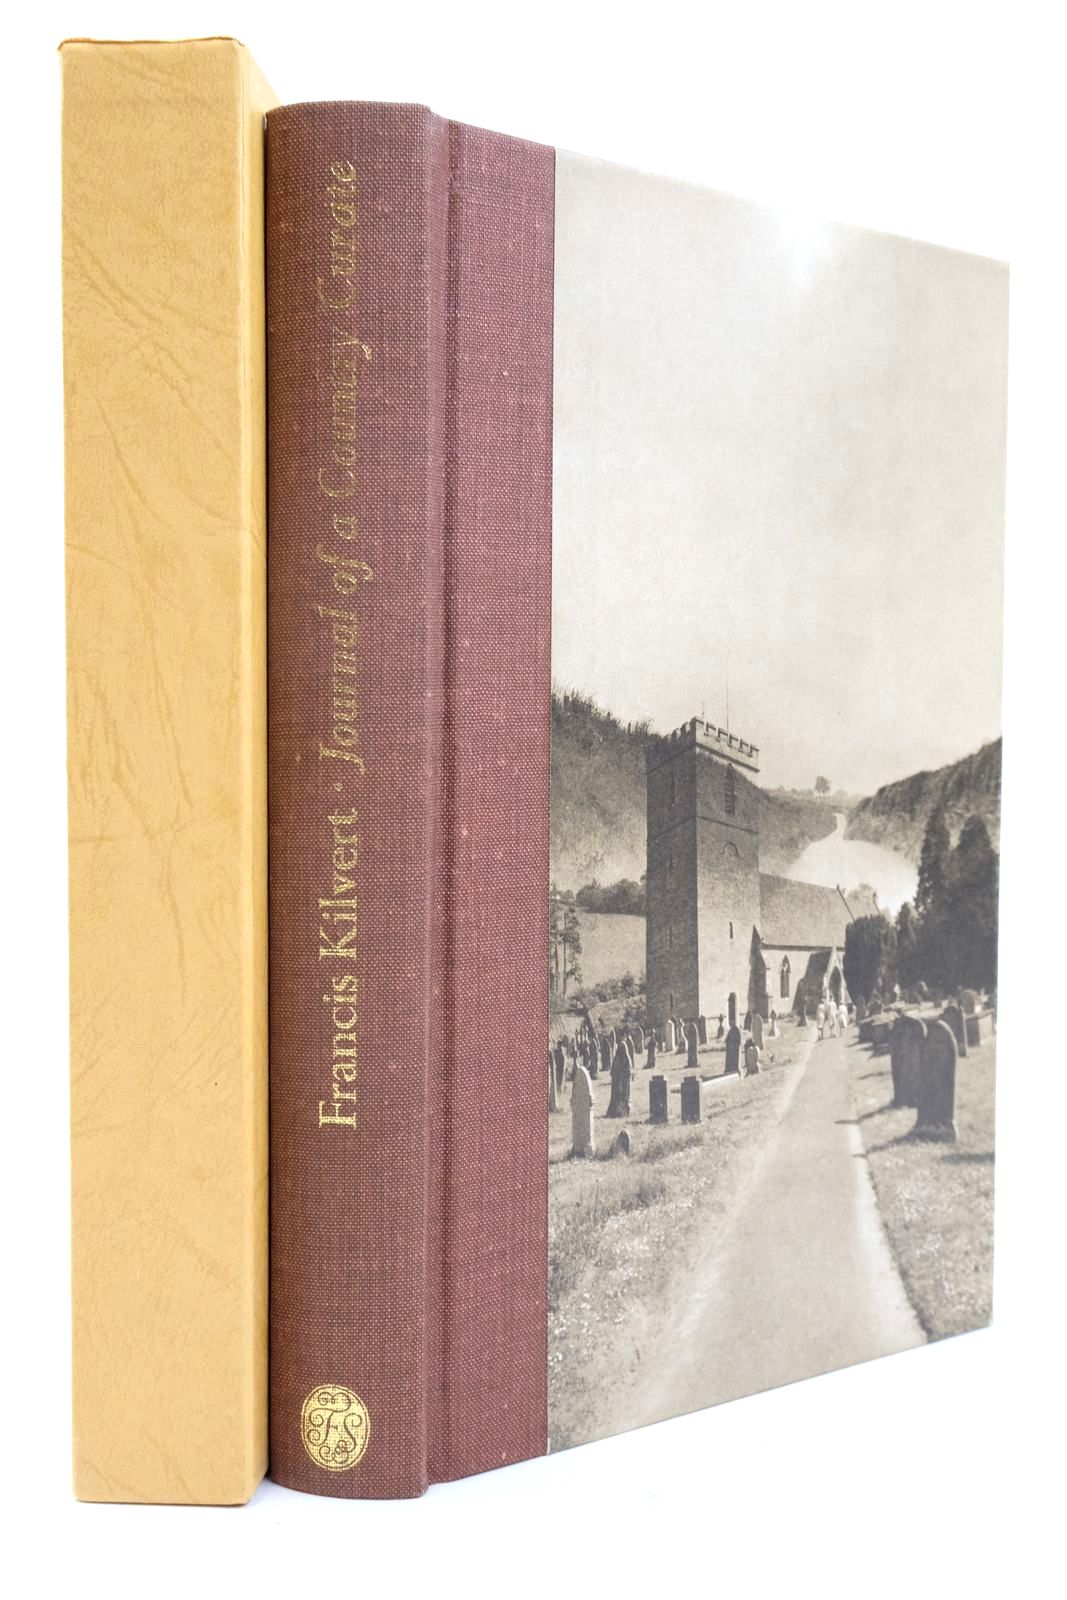 Photo of JOURNAL OF A COUNTRY CURATE written by Kilvert, Francis published by Folio Society (STOCK CODE: 2138387)  for sale by Stella & Rose's Books